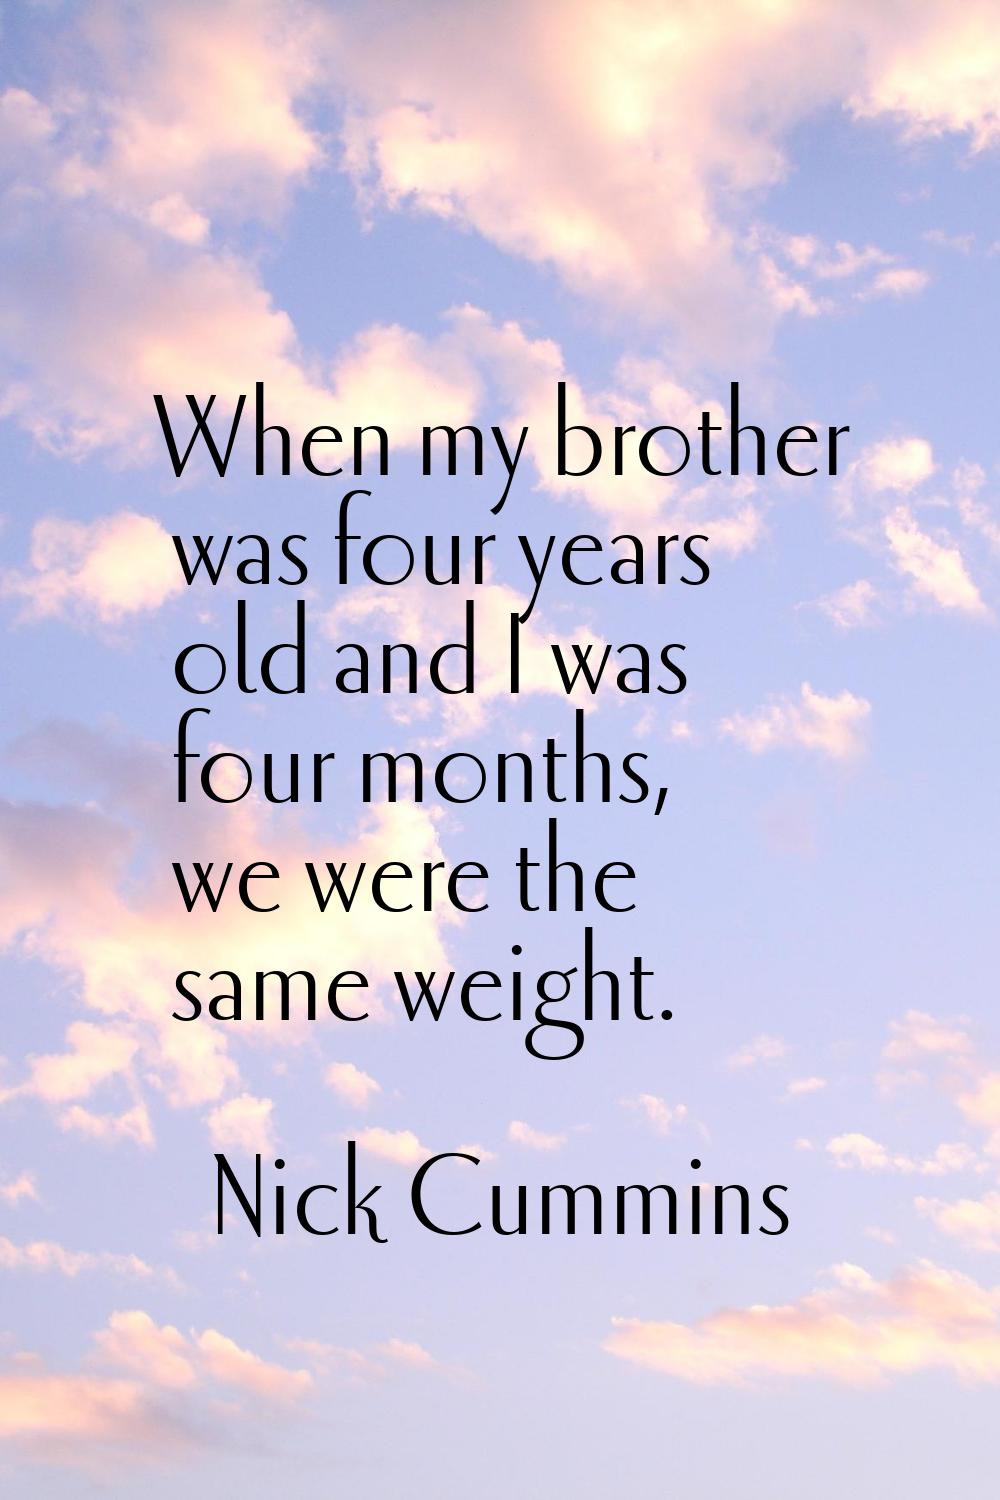 When my brother was four years old and I was four months, we were the same weight.